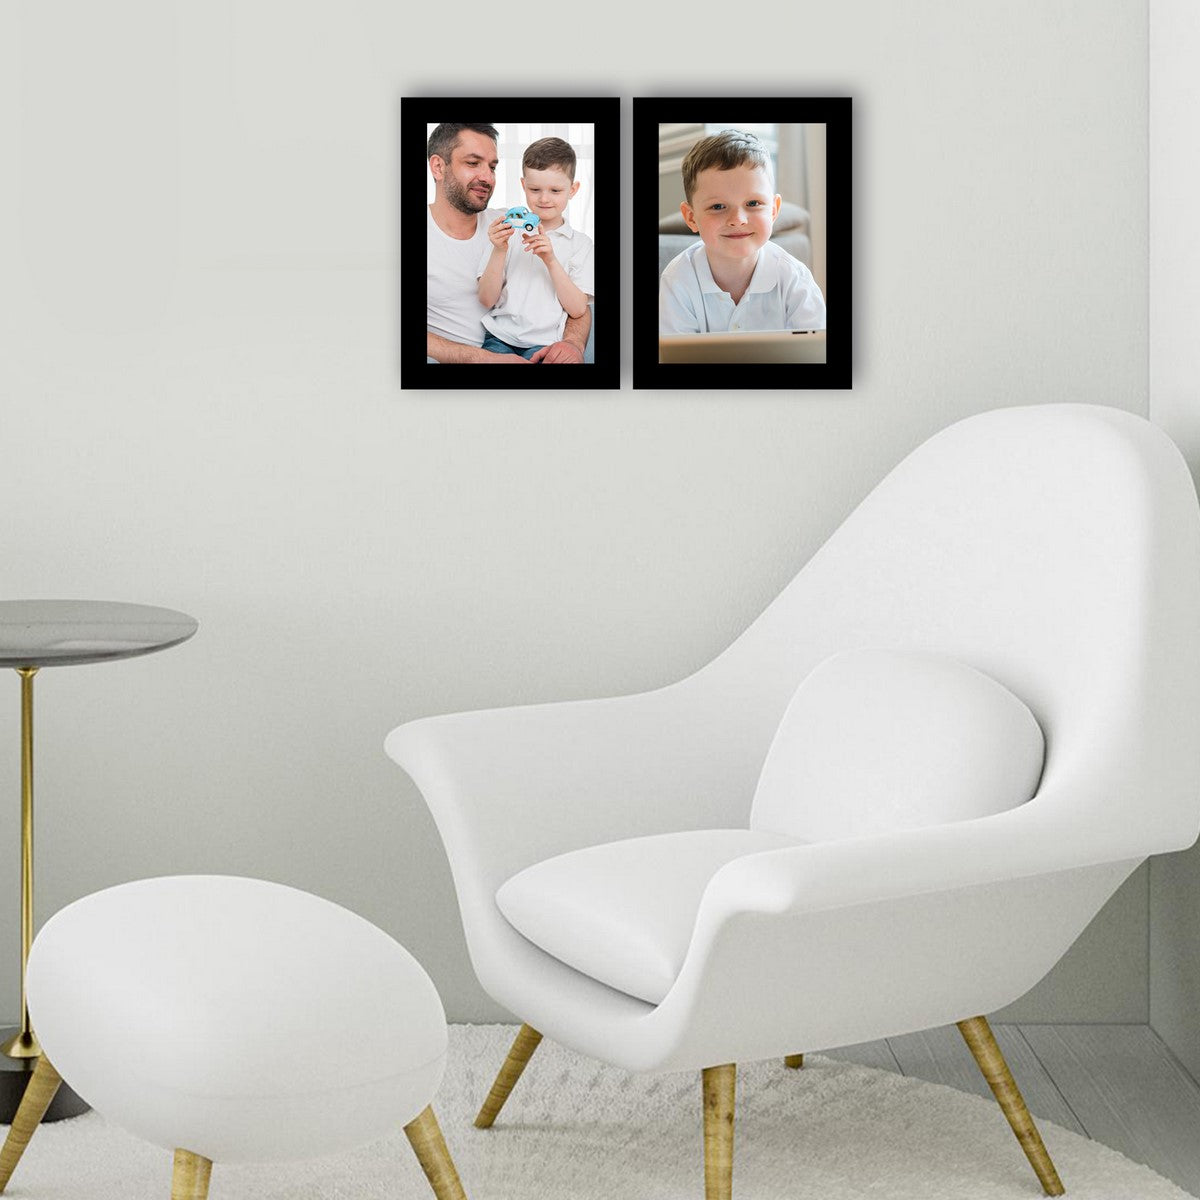 Memory Wall Collage Photo Frame - Set of 2 Photo Frames for 2 Photos of 6"x8" 2